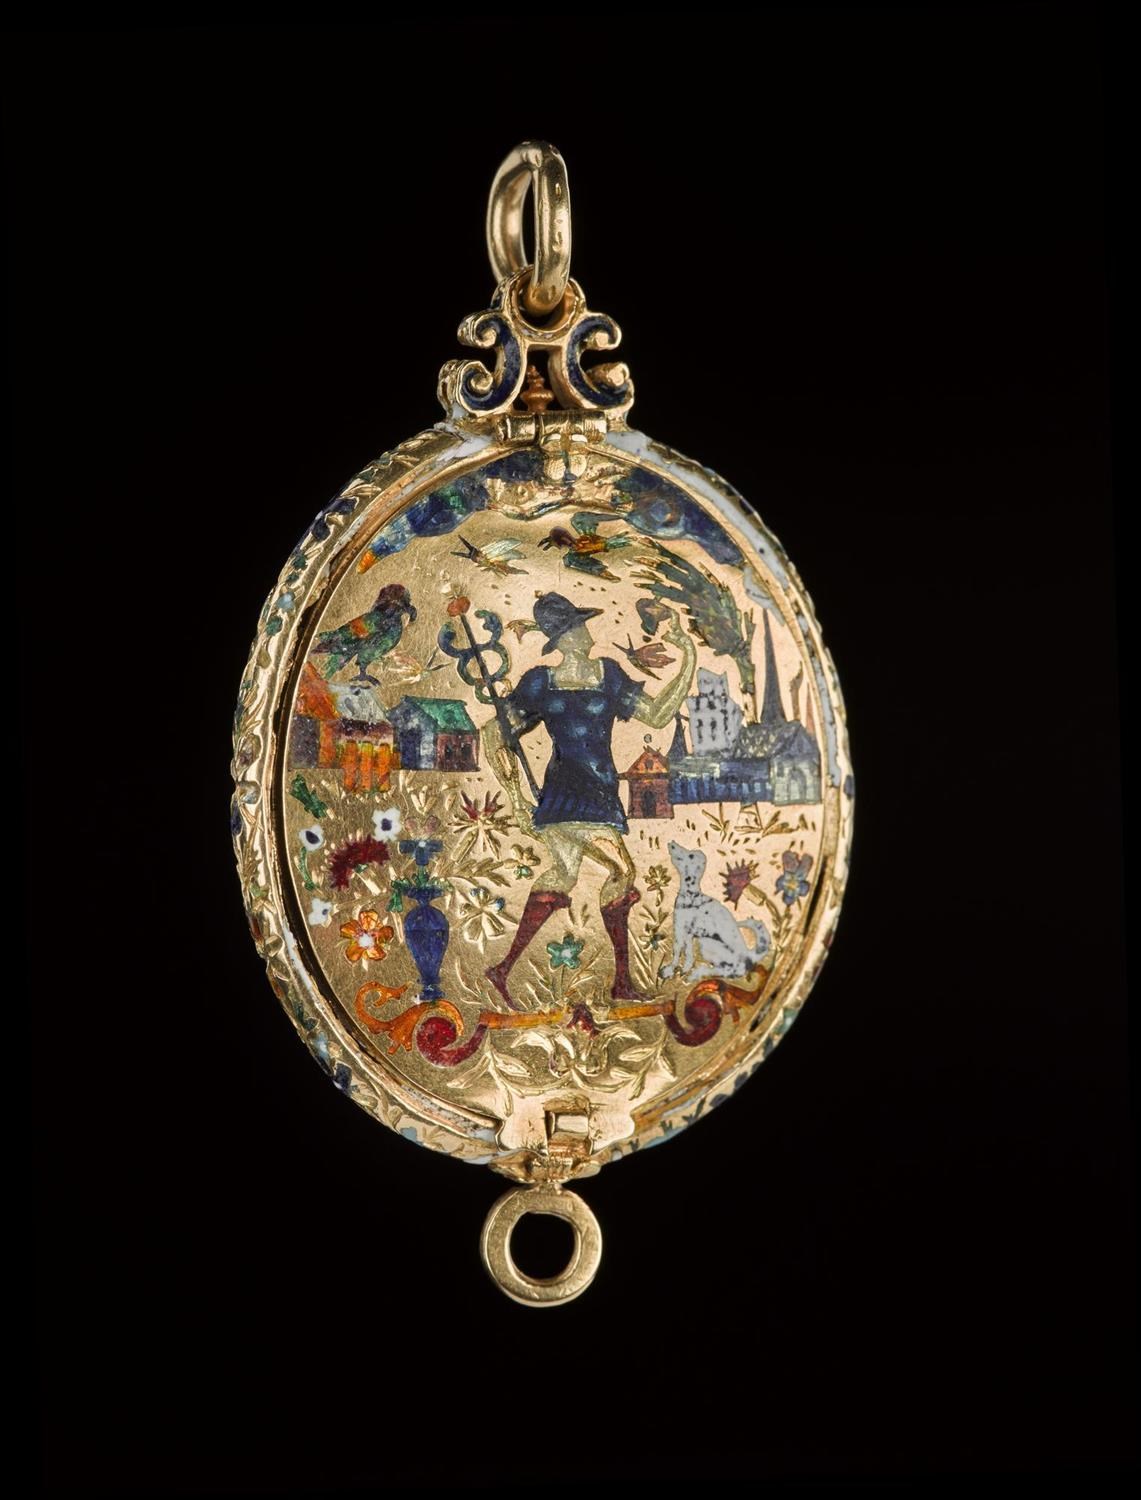 Gold locket with a colourful scene of a person, animals, houses, and plants